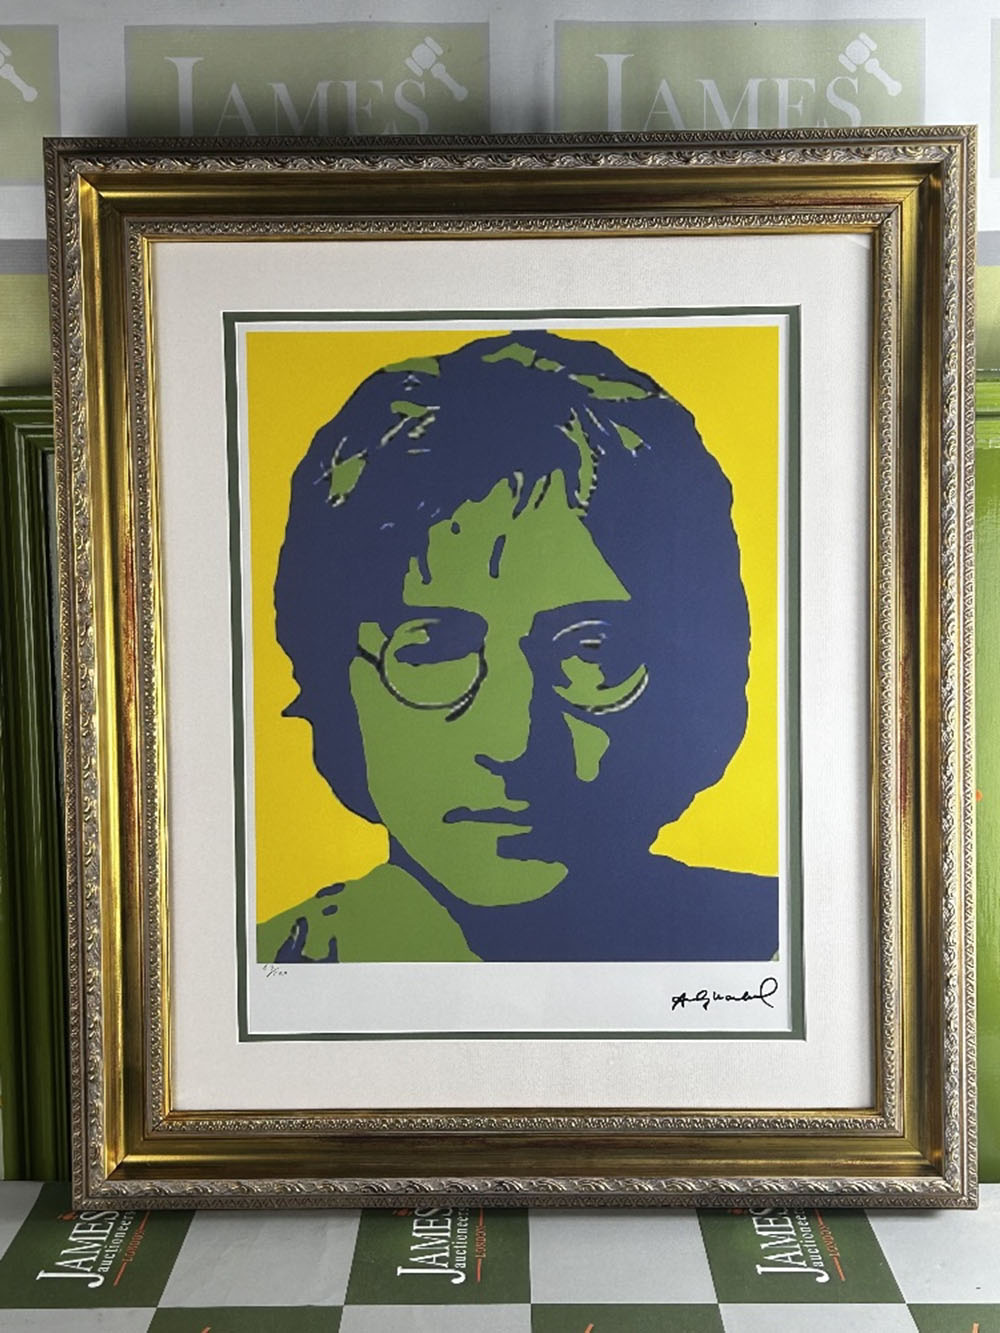 Andy Warhol &#8211; (1928-1987) &#8220;John Lennon&#8221; Numbered Lithograph